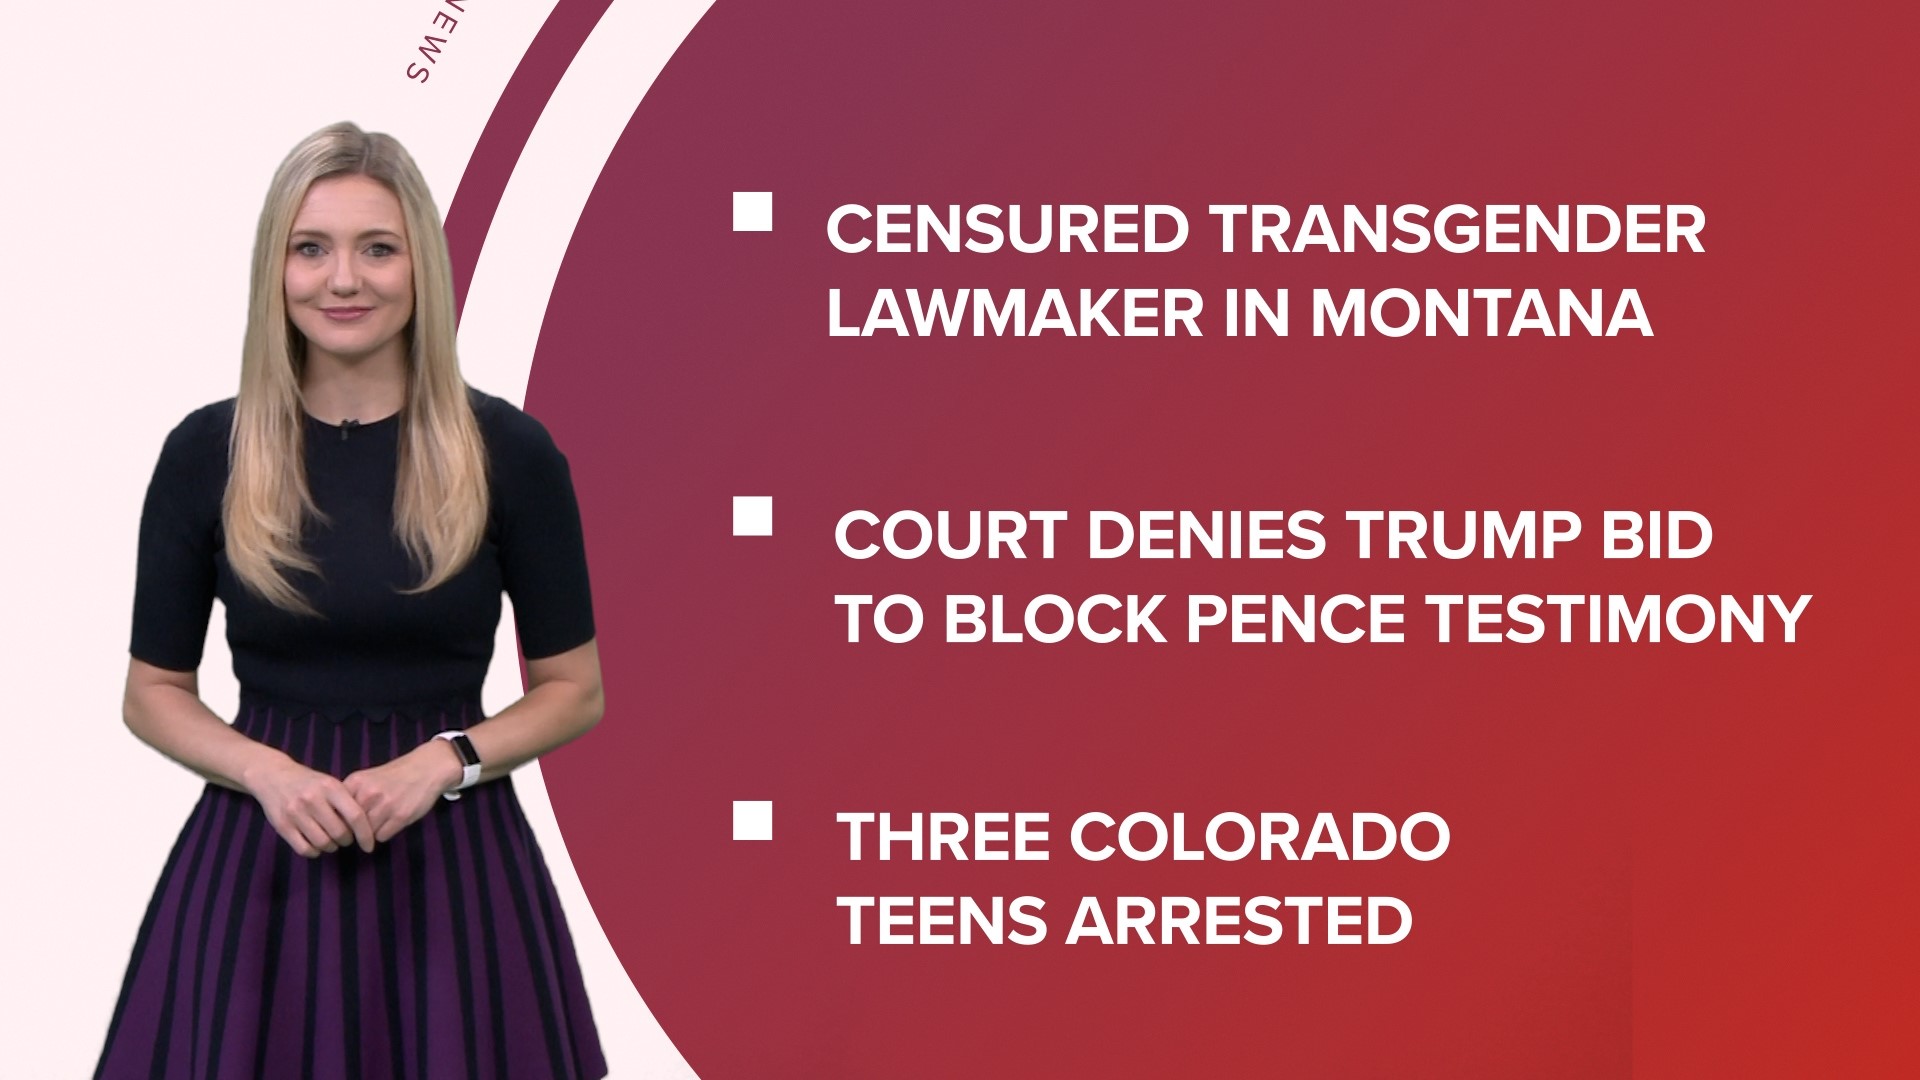 A look at what is happening in the news from a transgender lawmaker in Montana censured to a look at the current car market and the first round of the NFL draft.